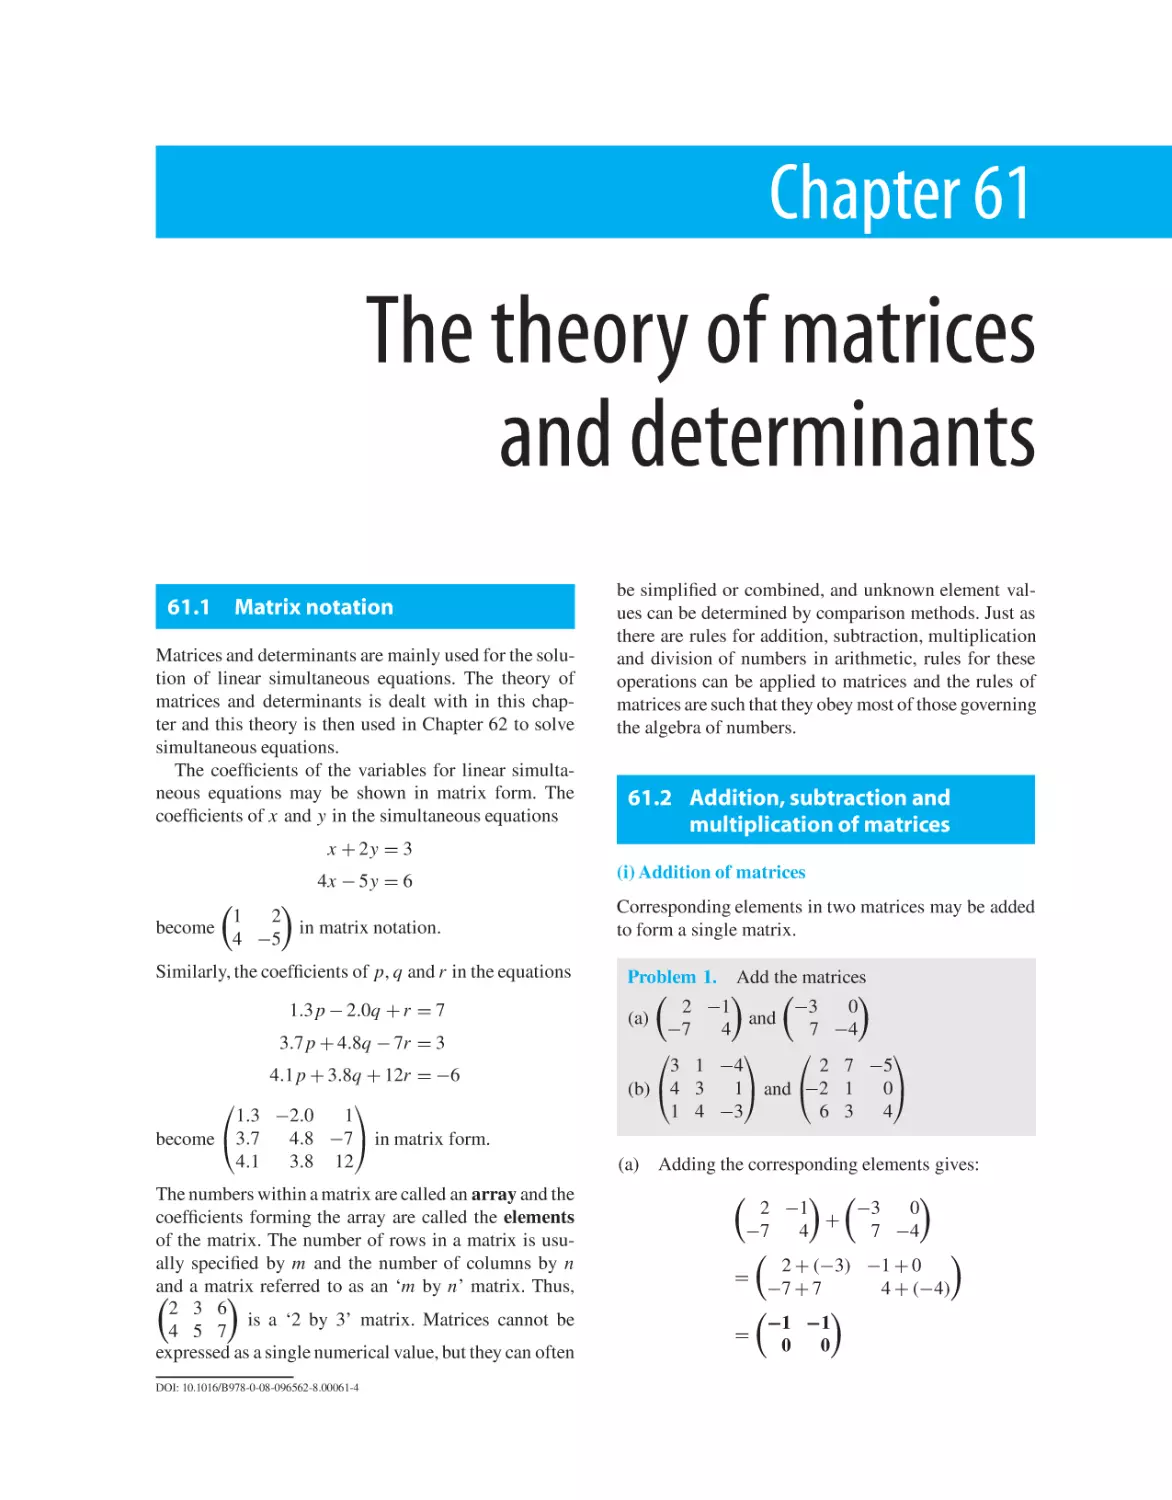 Chapter 61. The theory of matrices and determinants
61.1 Matrix notation
61.2 Addition, subtraction and multiplication of matrices